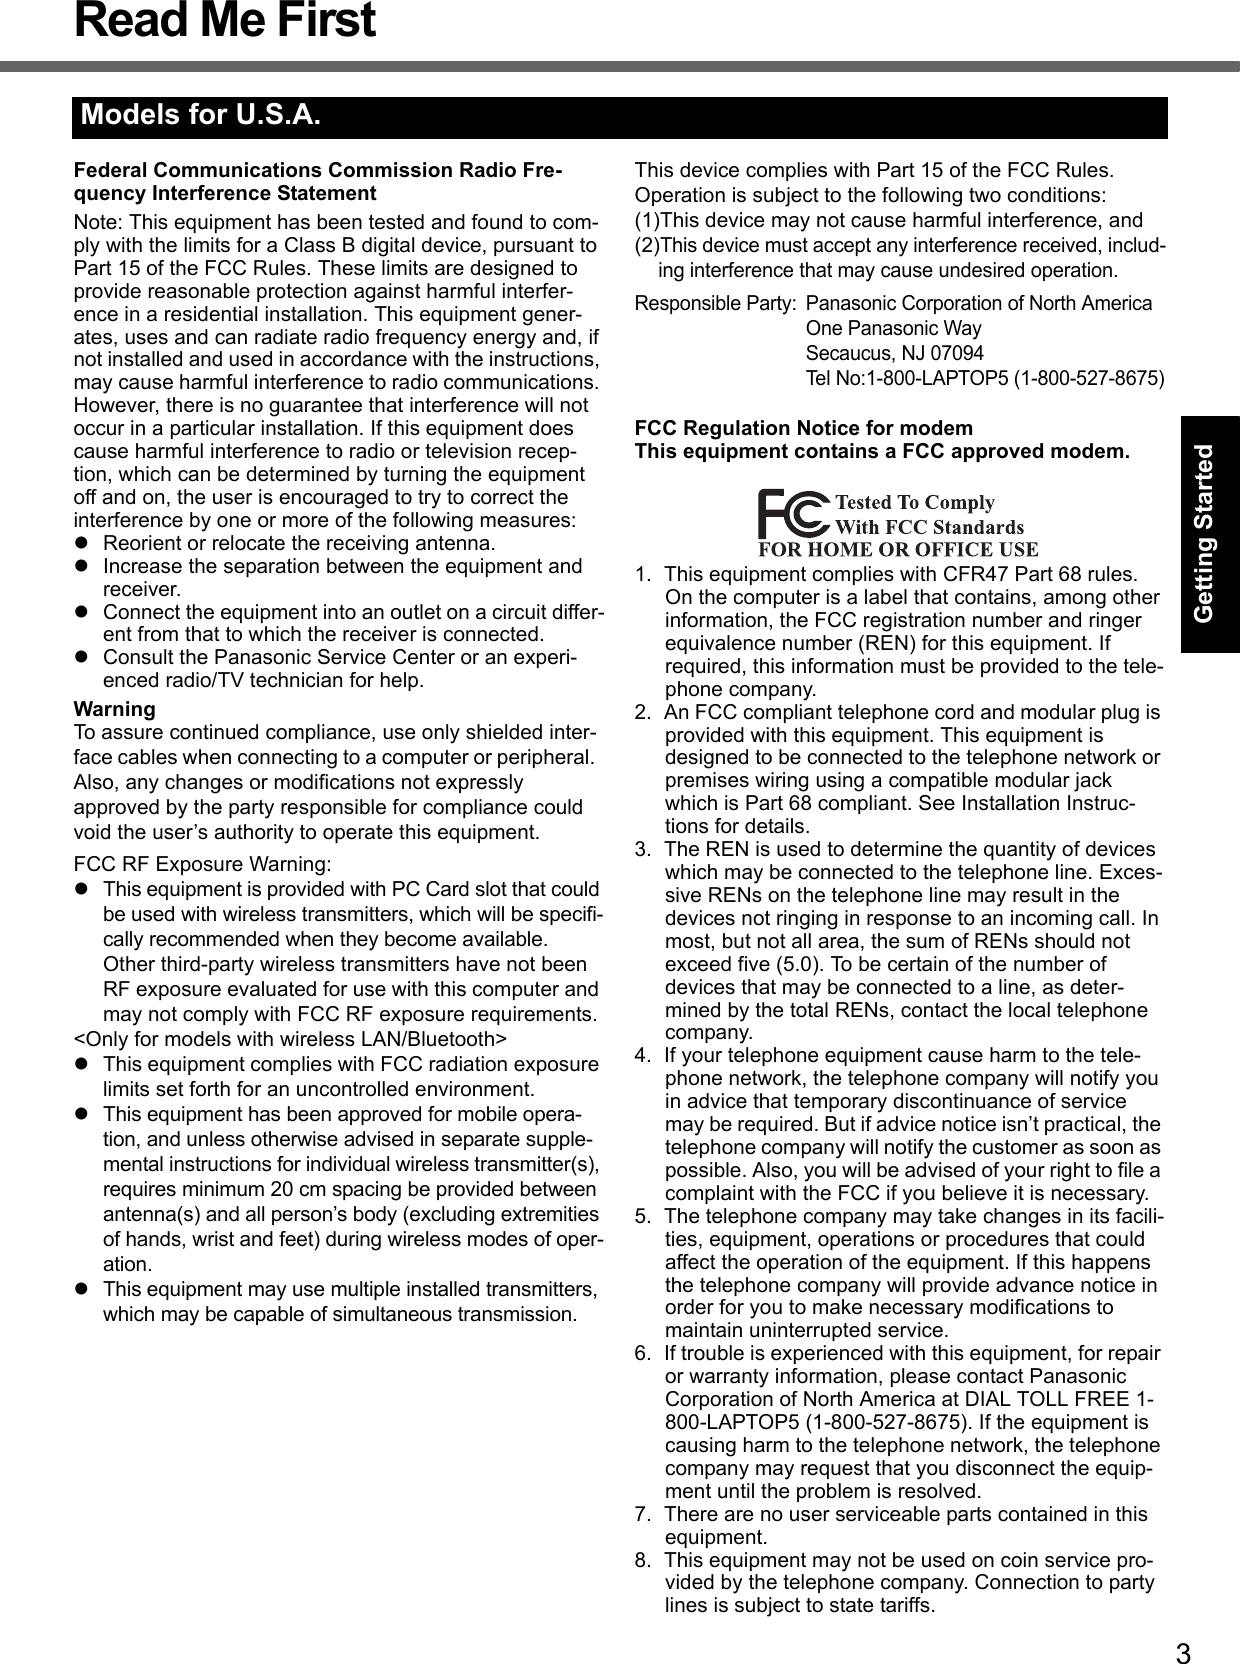 3Getting StartedUseful InformationTroubleshootingAppendixRead Me FirstFederal Communications Commission Radio Fre-quency Interference StatementNote: This equipment has been tested and found to com-ply with the limits for a Class B digital device, pursuant to Part 15 of the FCC Rules. These limits are designed to provide reasonable protection against harmful interfer-ence in a residential installation. This equipment gener-ates, uses and can radiate radio frequency energy and, if not installed and used in accordance with the instructions, may cause harmful interference to radio communications. However, there is no guarantee that interference will not occur in a particular installation. If this equipment does cause harmful interference to radio or television recep-tion, which can be determined by turning the equipment off and on, the user is encouraged to try to correct the interference by one or more of the following measures:zReorient or relocate the receiving antenna.zIncrease the separation between the equipment and receiver.zConnect the equipment into an outlet on a circuit differ-ent from that to which the receiver is connected.zConsult the Panasonic Service Center or an experi-enced radio/TV technician for help.WarningTo assure continued compliance, use only shielded inter-face cables when connecting to a computer or peripheral.  Also, any changes or modifications not expressly approved by the party responsible for compliance could void the user’s authority to operate this equipment.FCC RF Exposure Warning:zThis equipment is provided with PC Card slot that could be used with wireless transmitters, which will be specifi-cally recommended when they become available.Other third-party wireless transmitters have not been RF exposure evaluated for use with this computer and may not comply with FCC RF exposure requirements.&lt;Only for models with wireless LAN/Bluetooth&gt;zThis equipment complies with FCC radiation exposure limits set forth for an uncontrolled environment.zThis equipment has been approved for mobile opera-tion, and unless otherwise advised in separate supple-mental instructions for individual wireless transmitter(s), requires minimum 20 cm spacing be provided between antenna(s) and all person’s body (excluding extremities of hands, wrist and feet) during wireless modes of oper-ation.zThis equipment may use multiple installed transmitters, which may be capable of simultaneous transmission.  This device complies with Part 15 of the FCC Rules.  Operation is subject to the following two conditions:(1)This device may not cause harmful interference, and(2)This device must accept any interference received, includ-ing interference that may cause undesired operation.Responsible Party: Panasonic Corporation of North AmericaOne Panasonic WaySecaucus, NJ 07094Tel No:1-800-LAPTOP5 (1-800-527-8675)FCC Regulation Notice for modemThis equipment contains a FCC approved modem.1. This equipment complies with CFR47 Part 68 rules. On the computer is a label that contains, among other information, the FCC registration number and ringer equivalence number (REN) for this equipment. If required, this information must be provided to the tele-phone company.2. An FCC compliant telephone cord and modular plug is provided with this equipment. This equipment is designed to be connected to the telephone network or premises wiring using a compatible modular jack which is Part 68 compliant. See Installation Instruc-tions for details.3. The REN is used to determine the quantity of devices which may be connected to the telephone line. Exces-sive RENs on the telephone line may result in the devices not ringing in response to an incoming call. In most, but not all area, the sum of RENs should not exceed five (5.0). To be certain of the number of devices that may be connected to a line, as deter-mined by the total RENs, contact the local telephone company.4. If your telephone equipment cause harm to the tele-phone network, the telephone company will notify you in advice that temporary discontinuance of service may be required. But if advice notice isn’t practical, the telephone company will notify the customer as soon as possible. Also, you will be advised of your right to file a complaint with the FCC if you believe it is necessary.5. The telephone company may take changes in its facili-ties, equipment, operations or procedures that could affect the operation of the equipment. If this happens the telephone company will provide advance notice in order for you to make necessary modifications to maintain uninterrupted service.6. If trouble is experienced with this equipment, for repair or warranty information, please contact Panasonic Corporation of North America at DIAL TOLL FREE 1-800-LAPTOP5 (1-800-527-8675). If the equipment is causing harm to the telephone network, the telephone company may request that you disconnect the equip-ment until the problem is resolved.7. There are no user serviceable parts contained in this equipment.8. This equipment may not be used on coin service pro-vided by the telephone company. Connection to party lines is subject to state tariffs.Models for U.S.A.